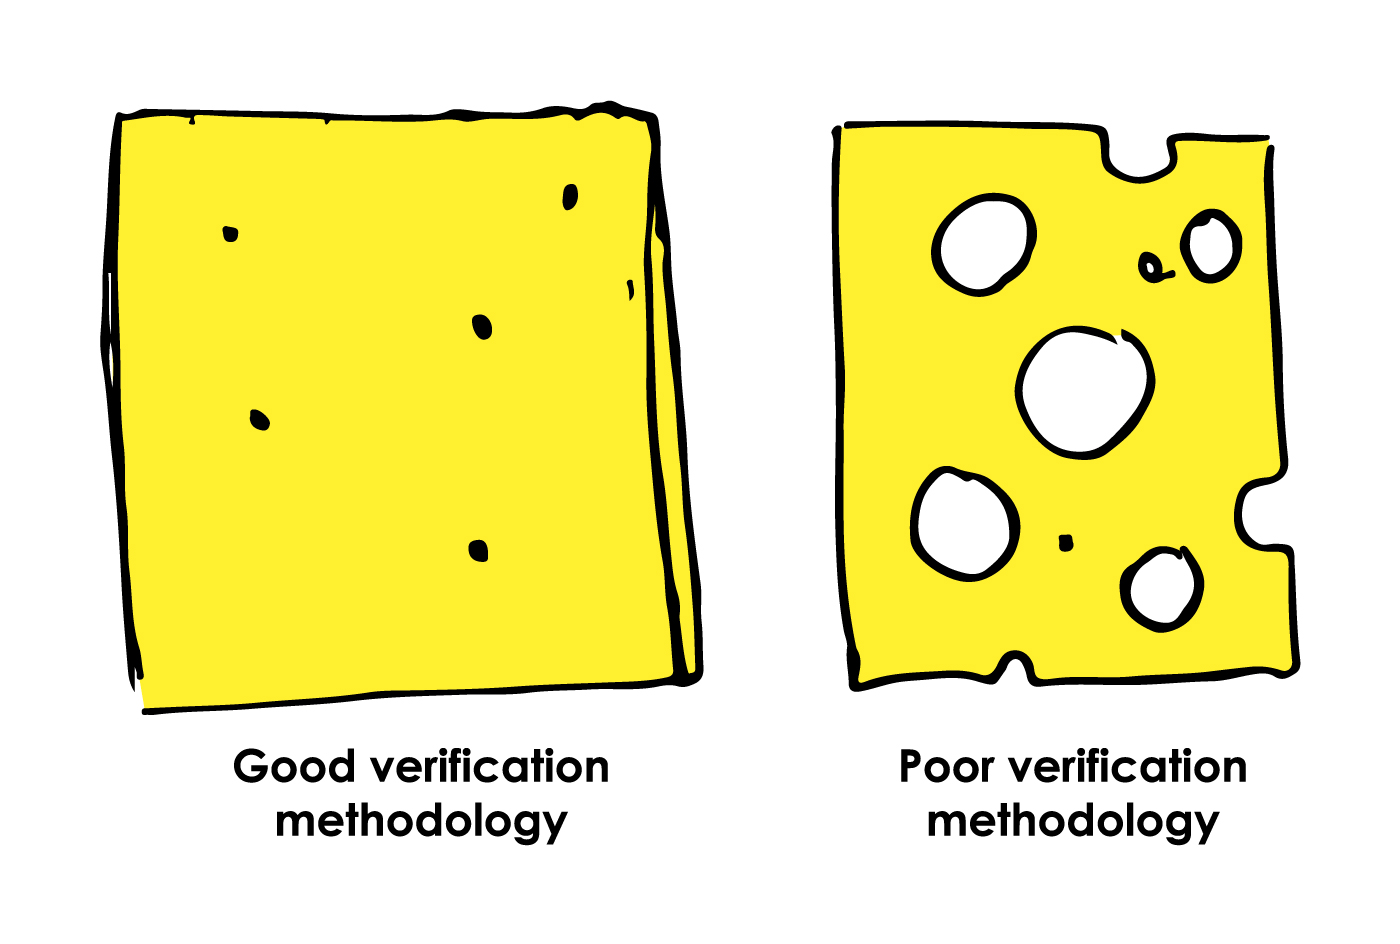 Swiss cheese model slices showing processor verification quality